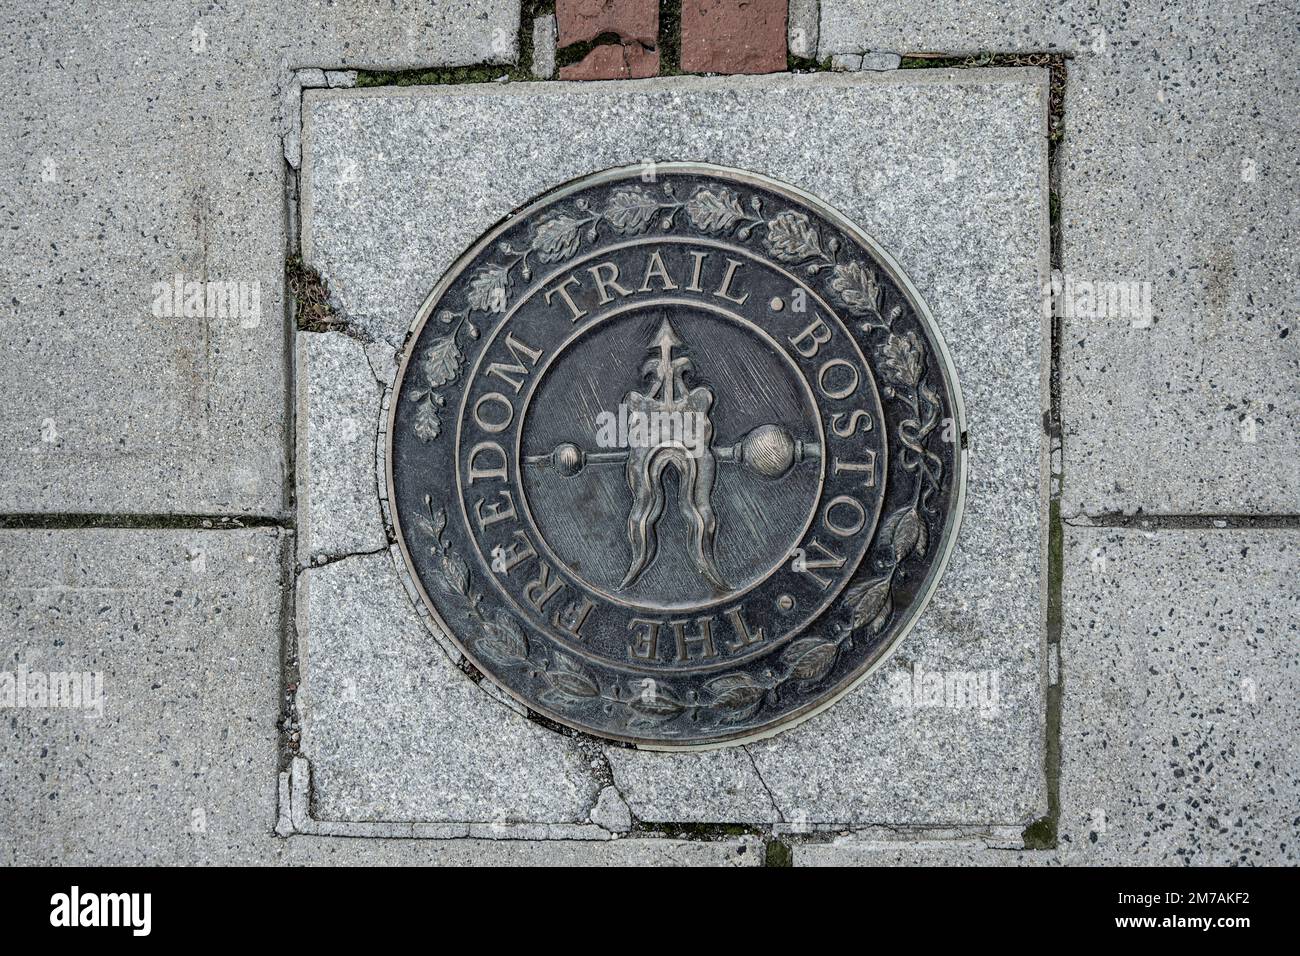 sidewalk emblem of the Boston Freedom Trail pointing in the direction of the walking trail used by historians and tourists Stock Photo